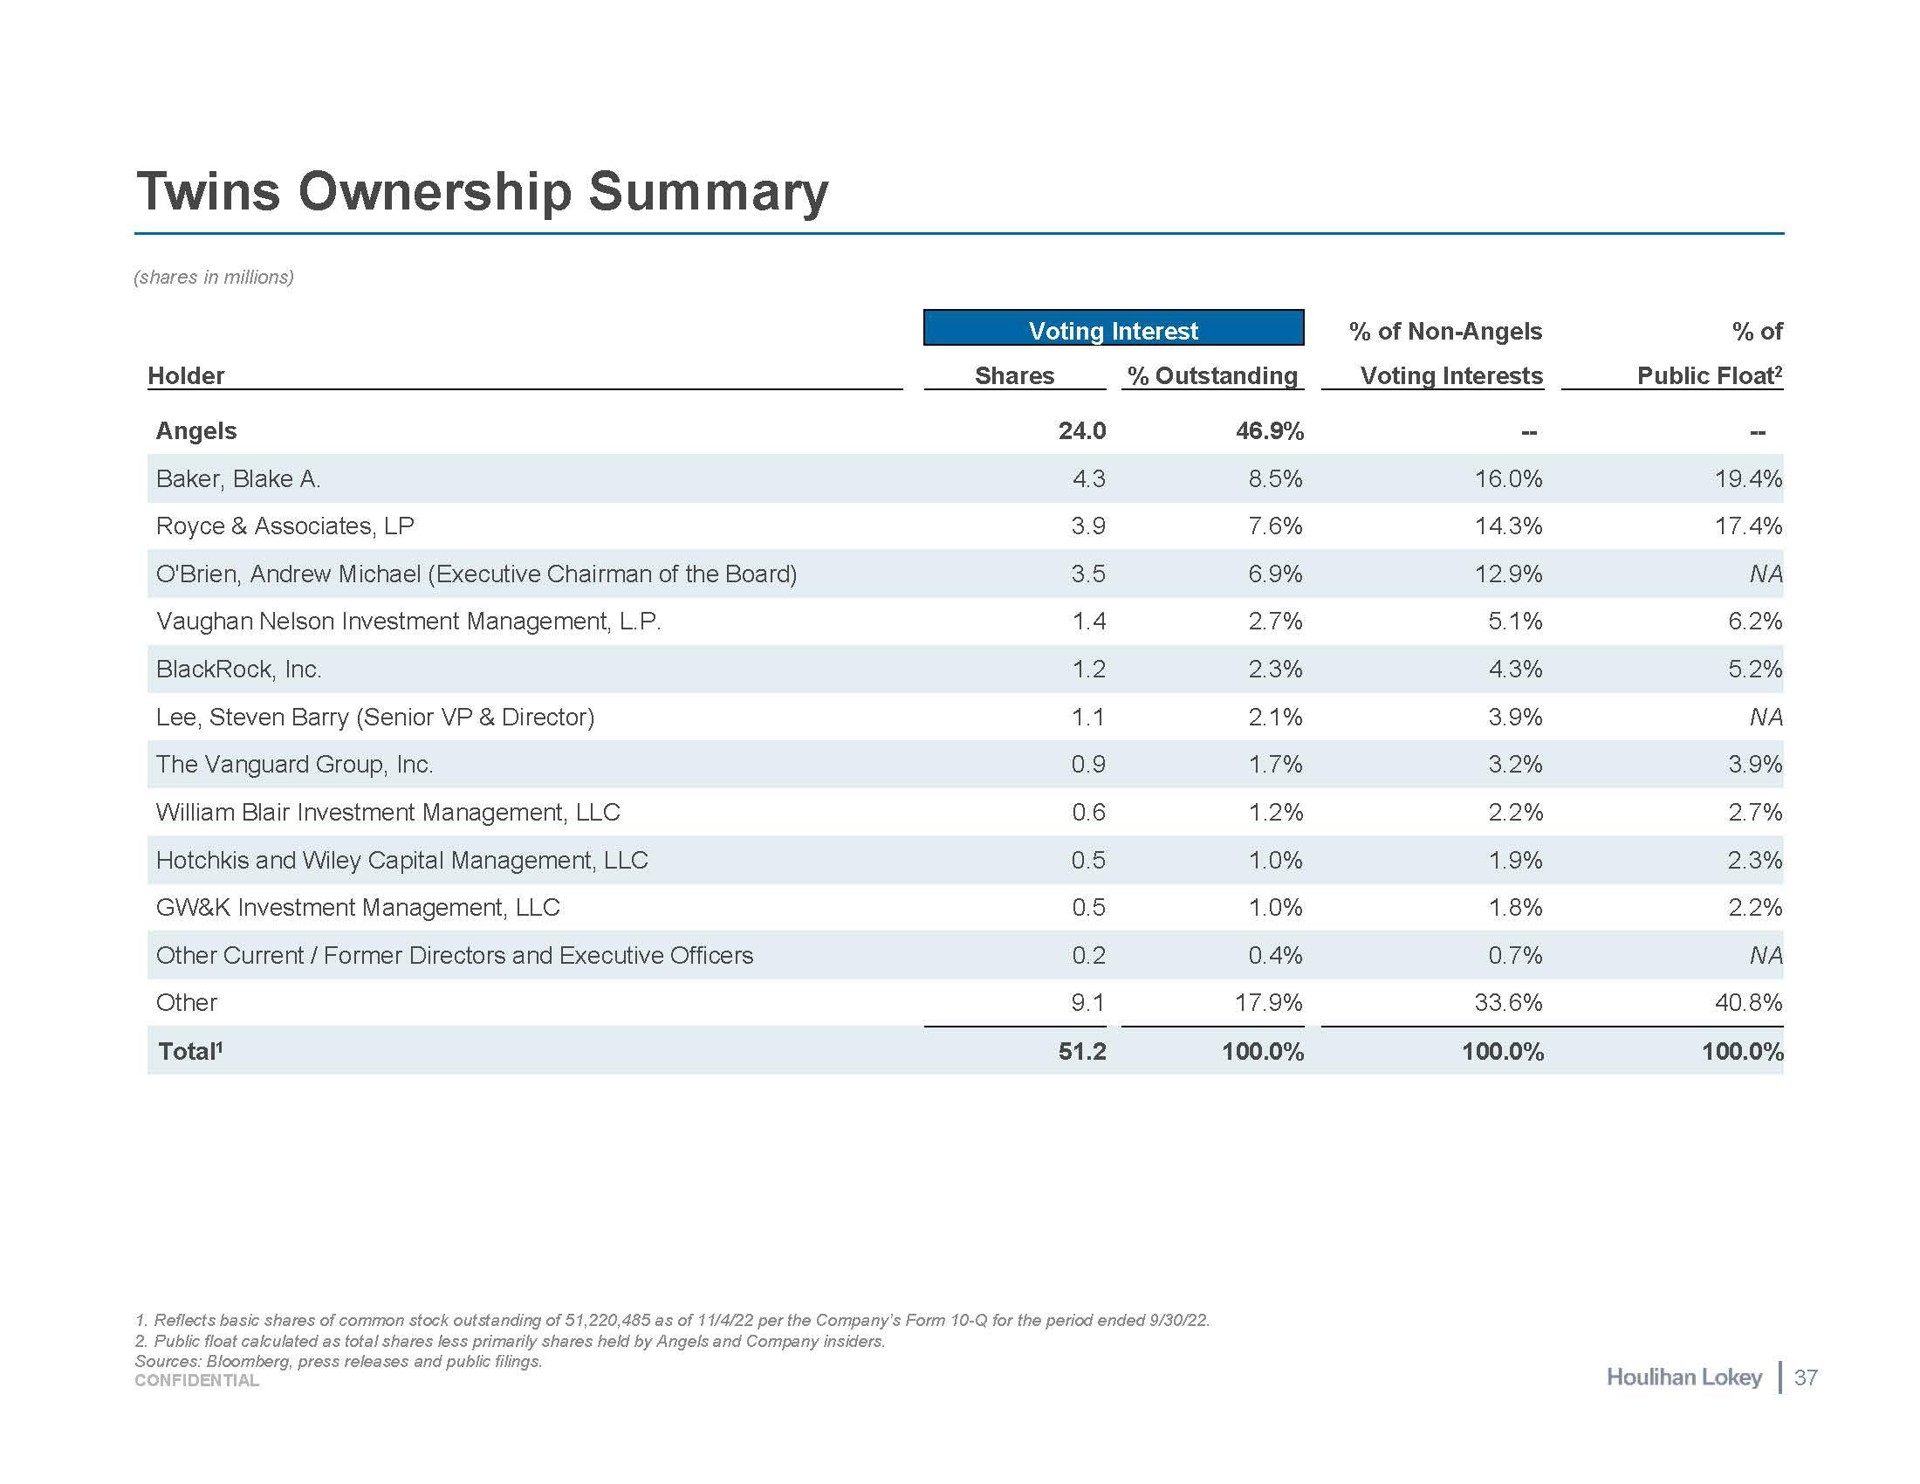 twins ownership summary holder shares outstanding voting interests public float | Houlihan Lokey